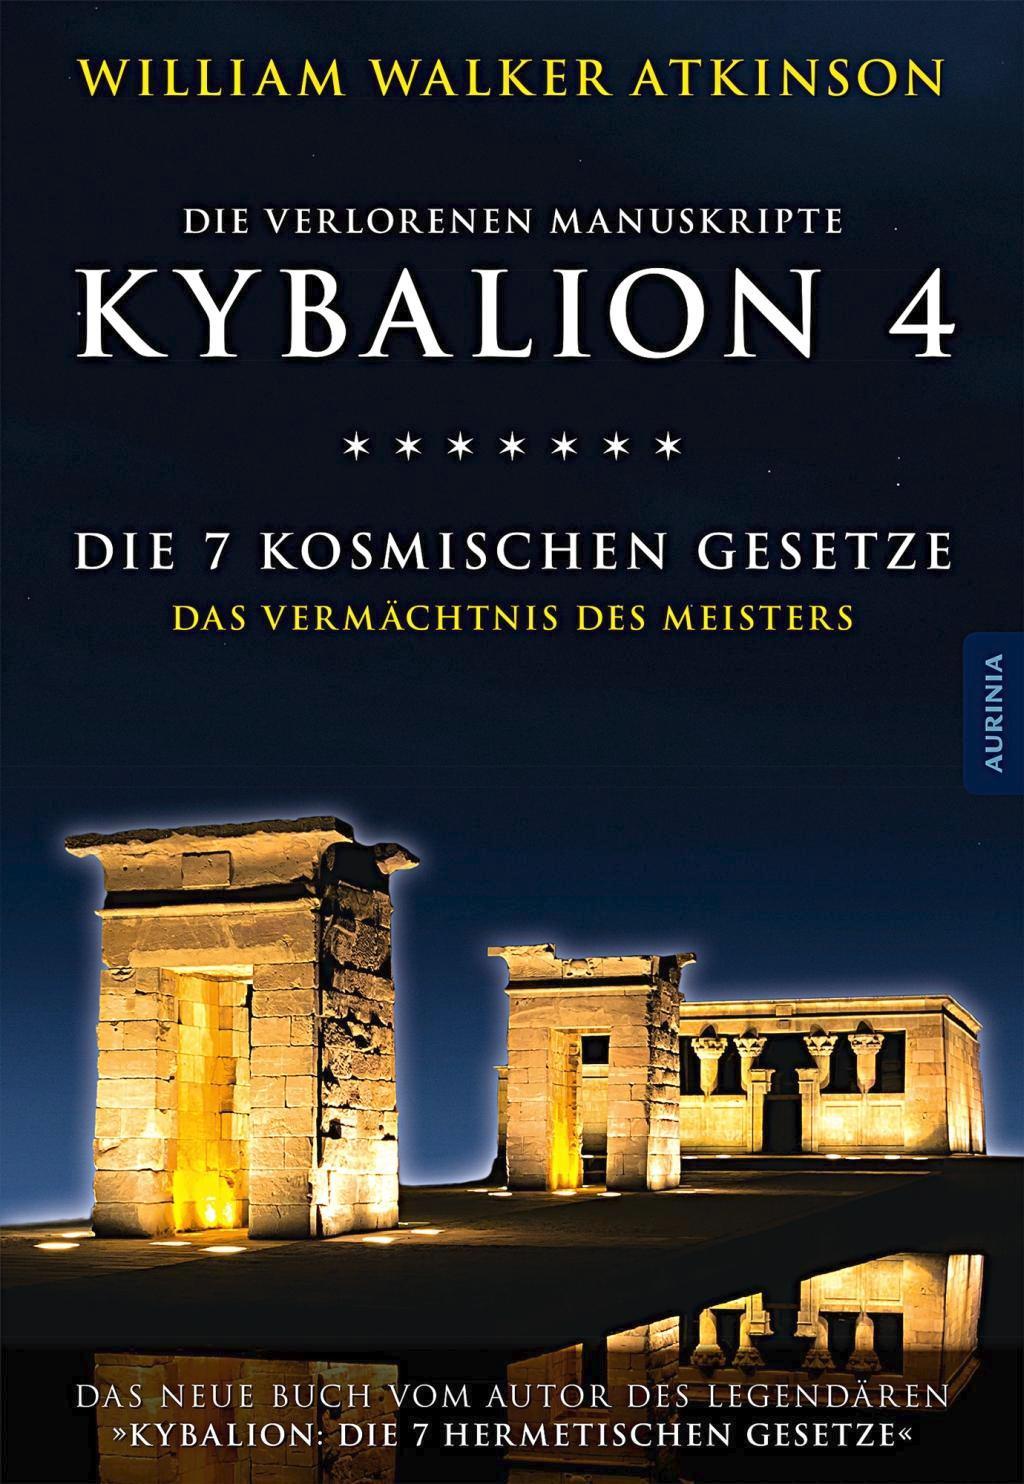 Kybalion 4